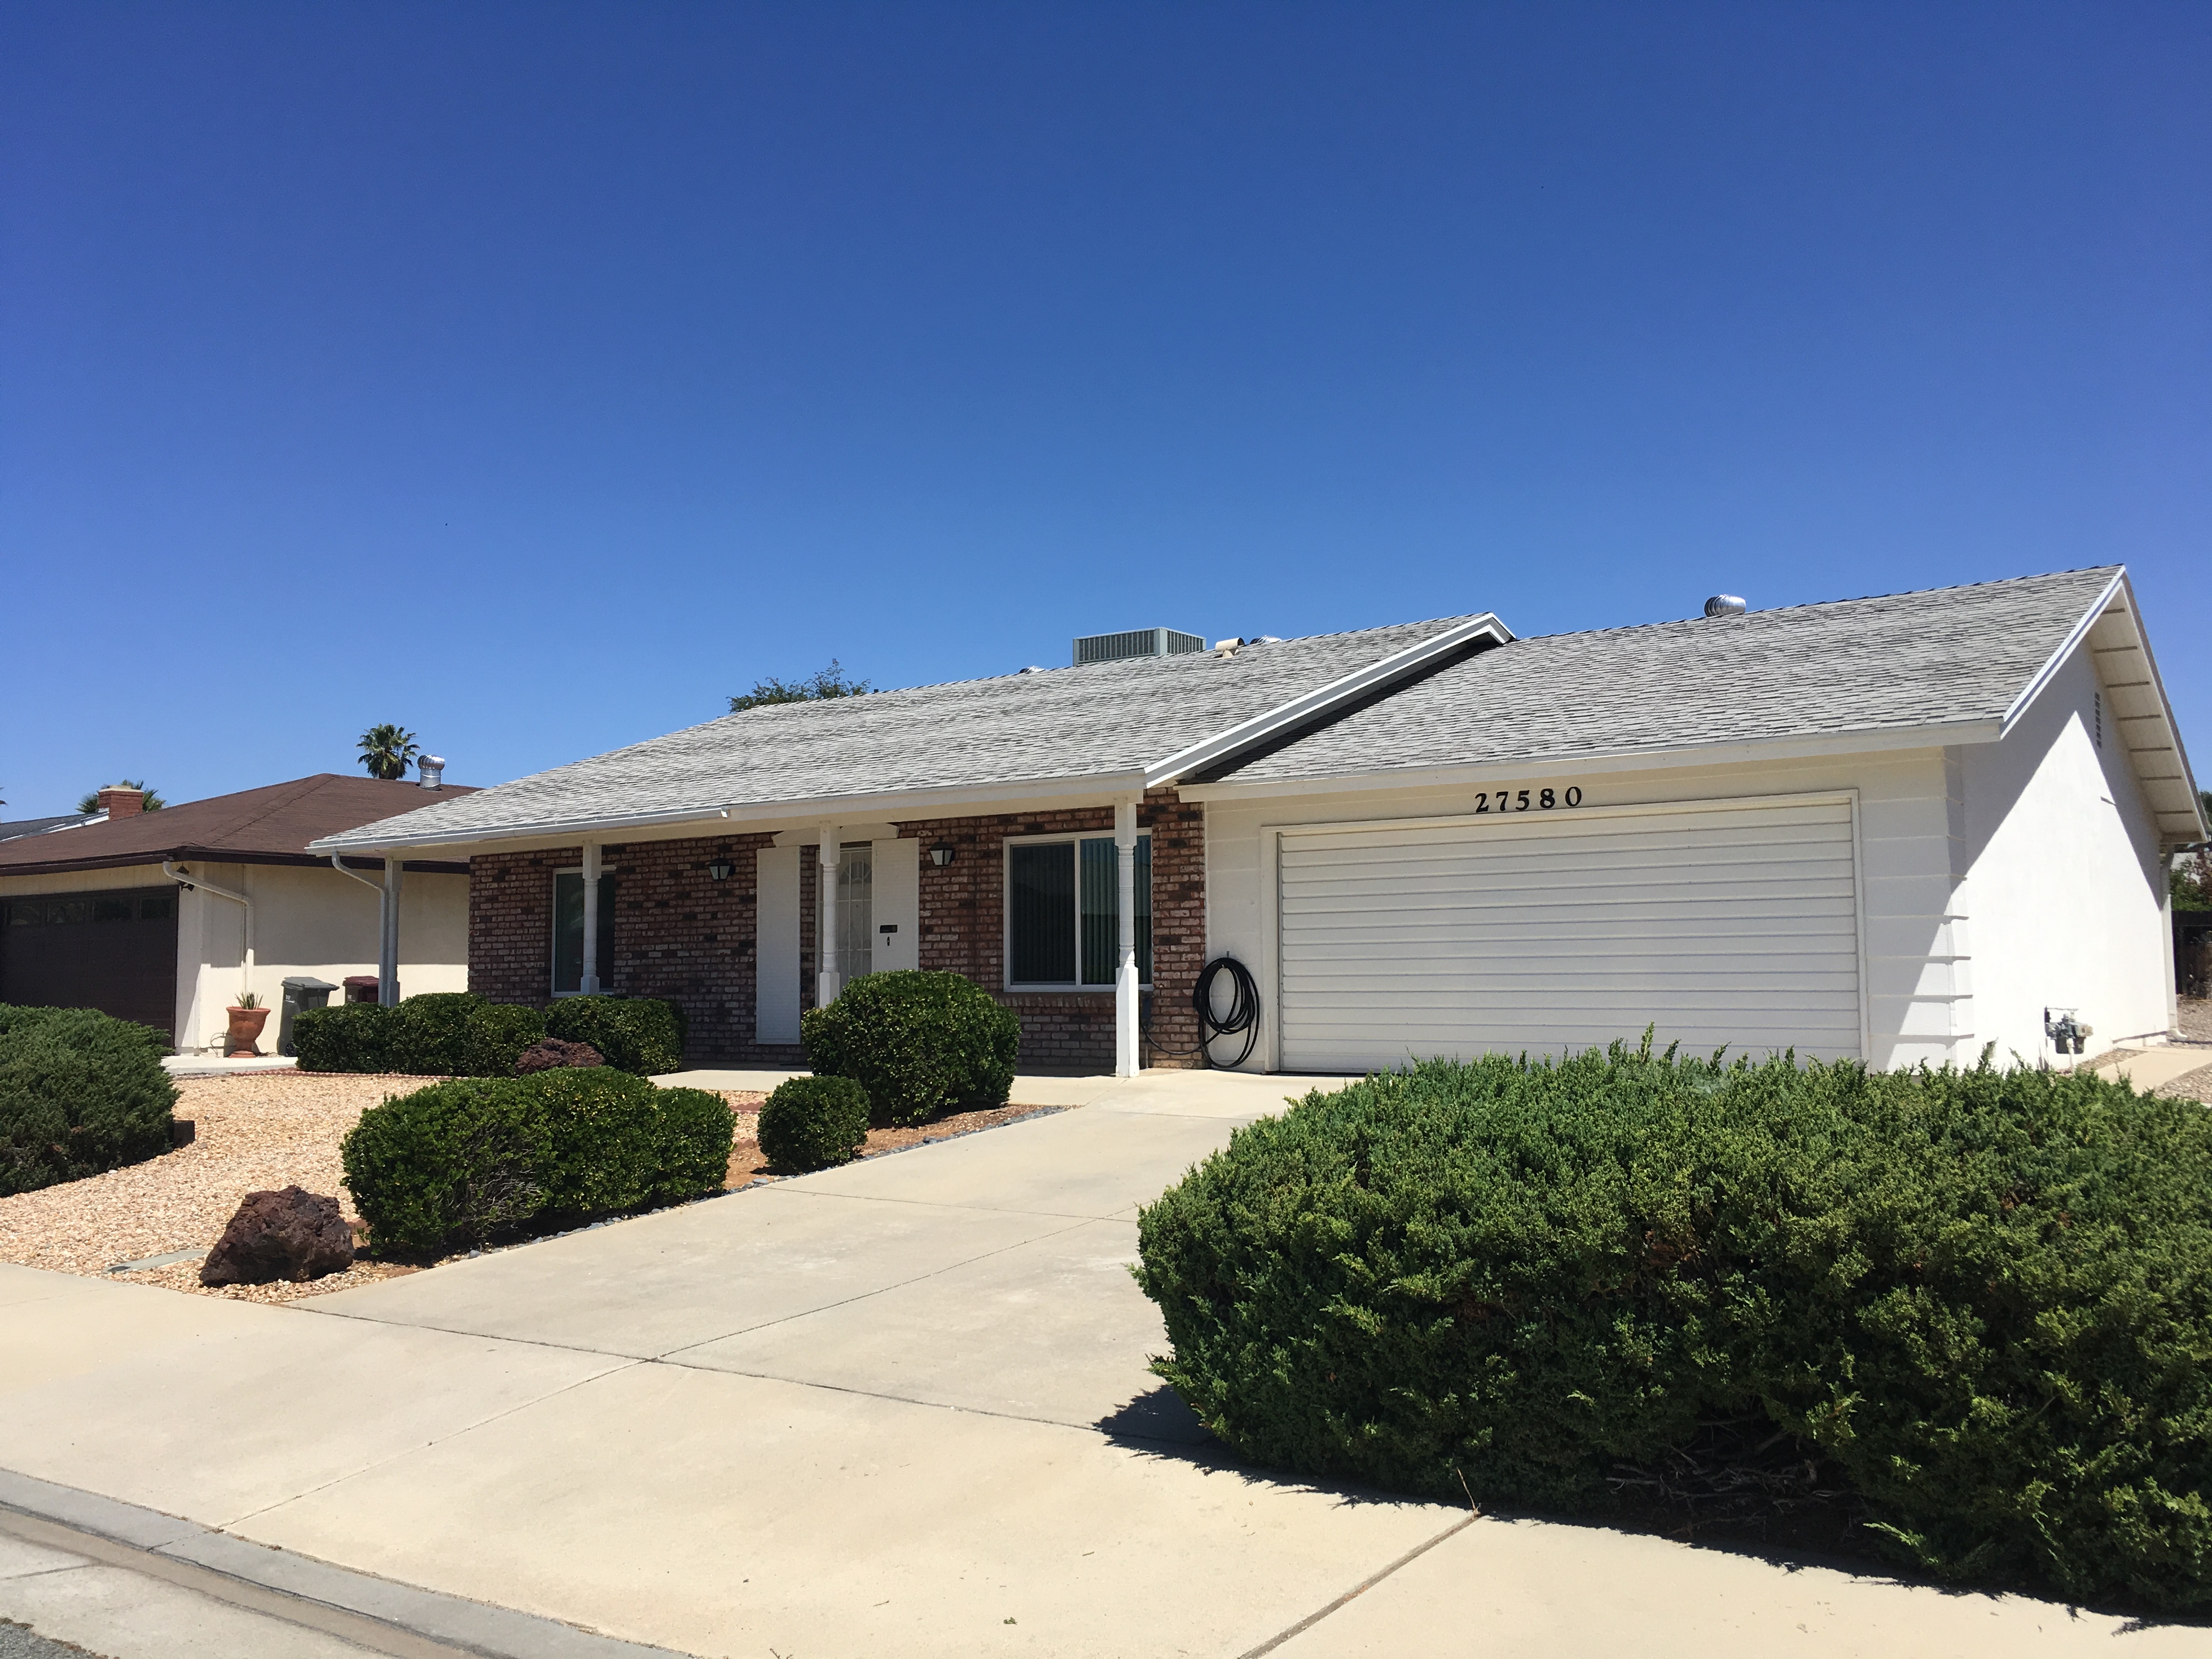 Just Listed and went into Escrow in 2 days!  May 2017.  55+ Senior Core area of Menifee - Great Neighborhood!  Call Denise Gentile, Realtor at Coldwell Banker Associated Brokers Realty if you would like the same professional results!  951-751-1311.